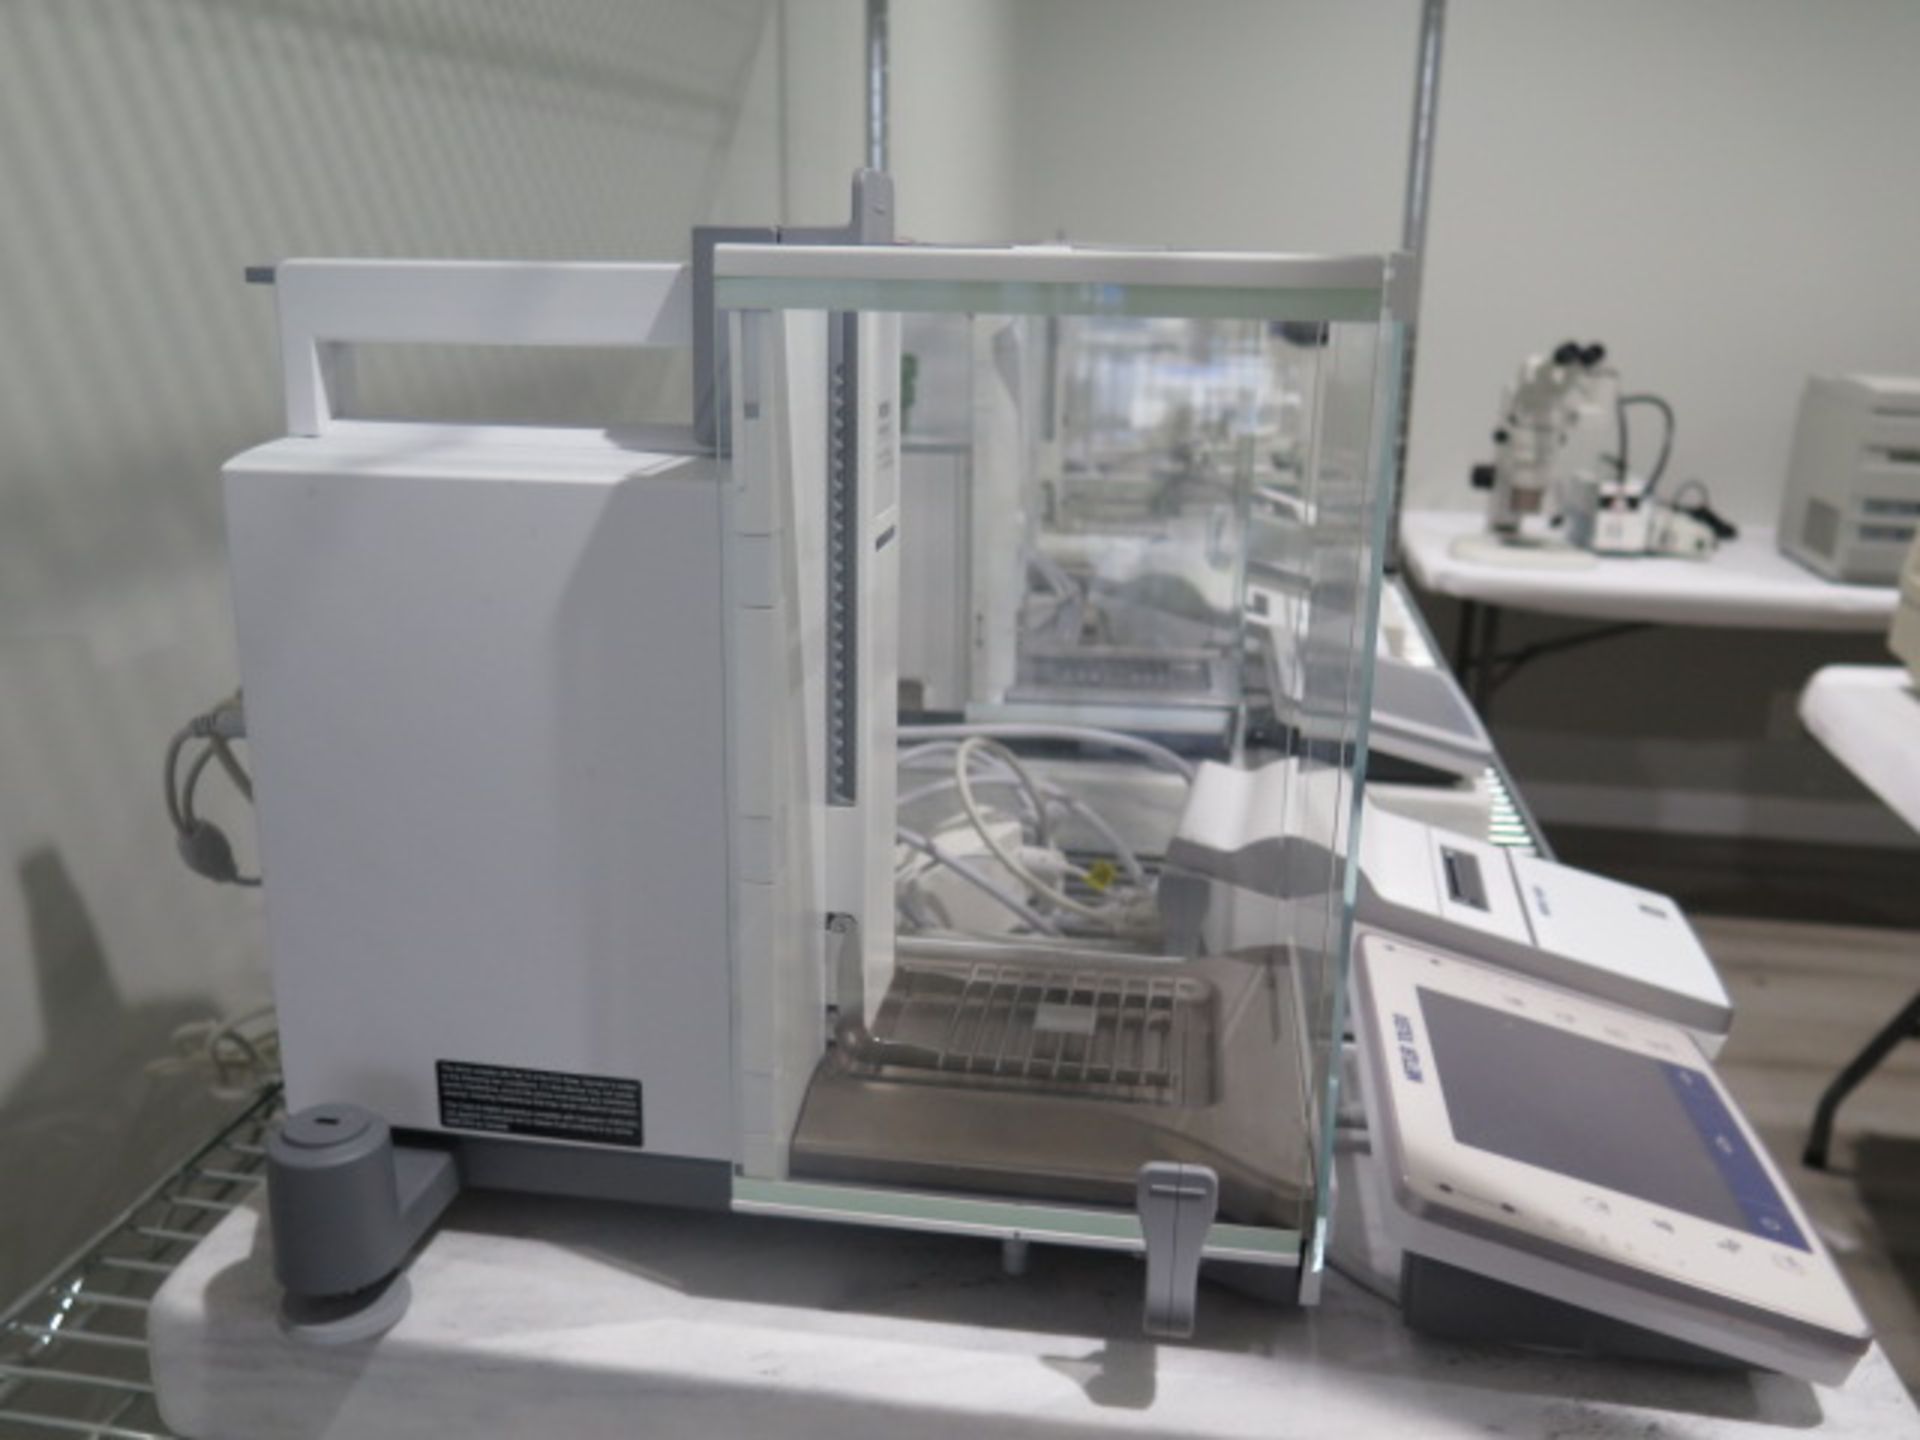 Mettler Toledo XPE205 DeltaRange Analytical Balance Scale 0.01mg-220g w/ Static Detect, SOLD AS IS - Image 3 of 8